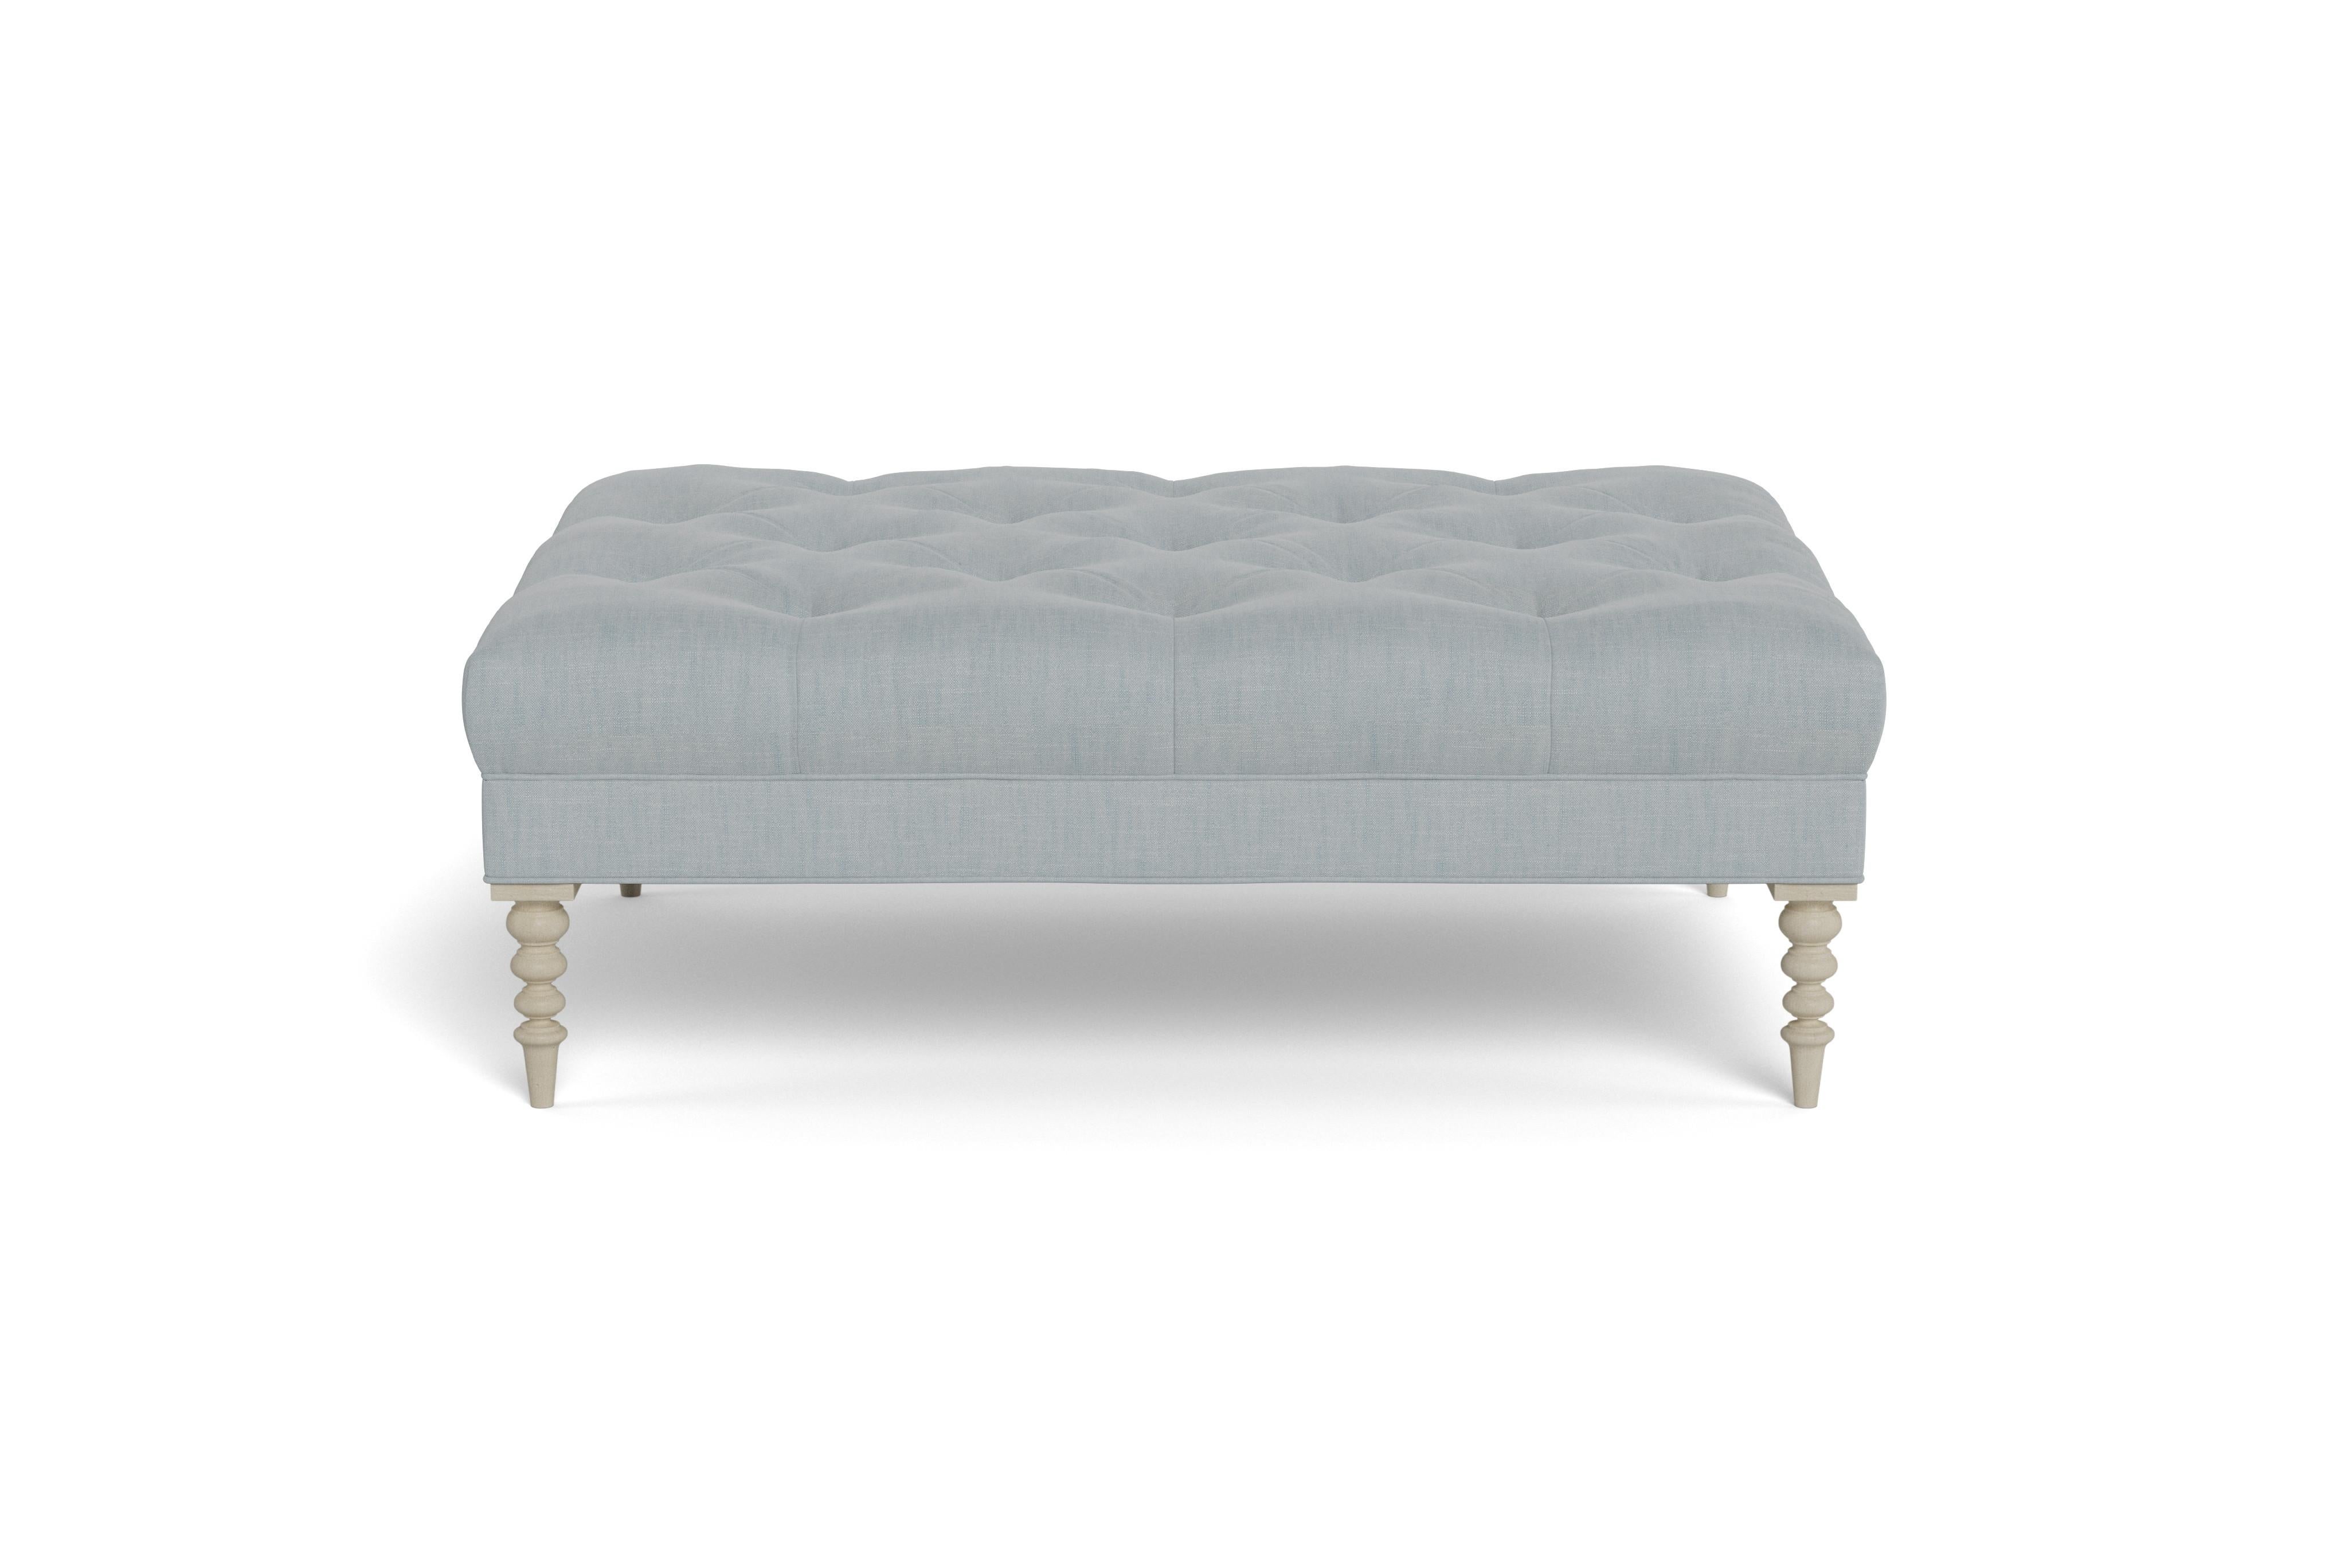 A large cocktail ottoman, with beautiful tufting set atop a trim upholstered box, with wonderfully turned legs. Made to order in a neutral sky performance linen, a fabric able to be cleaned and used in high traffic areas.  Legs finished in alpine